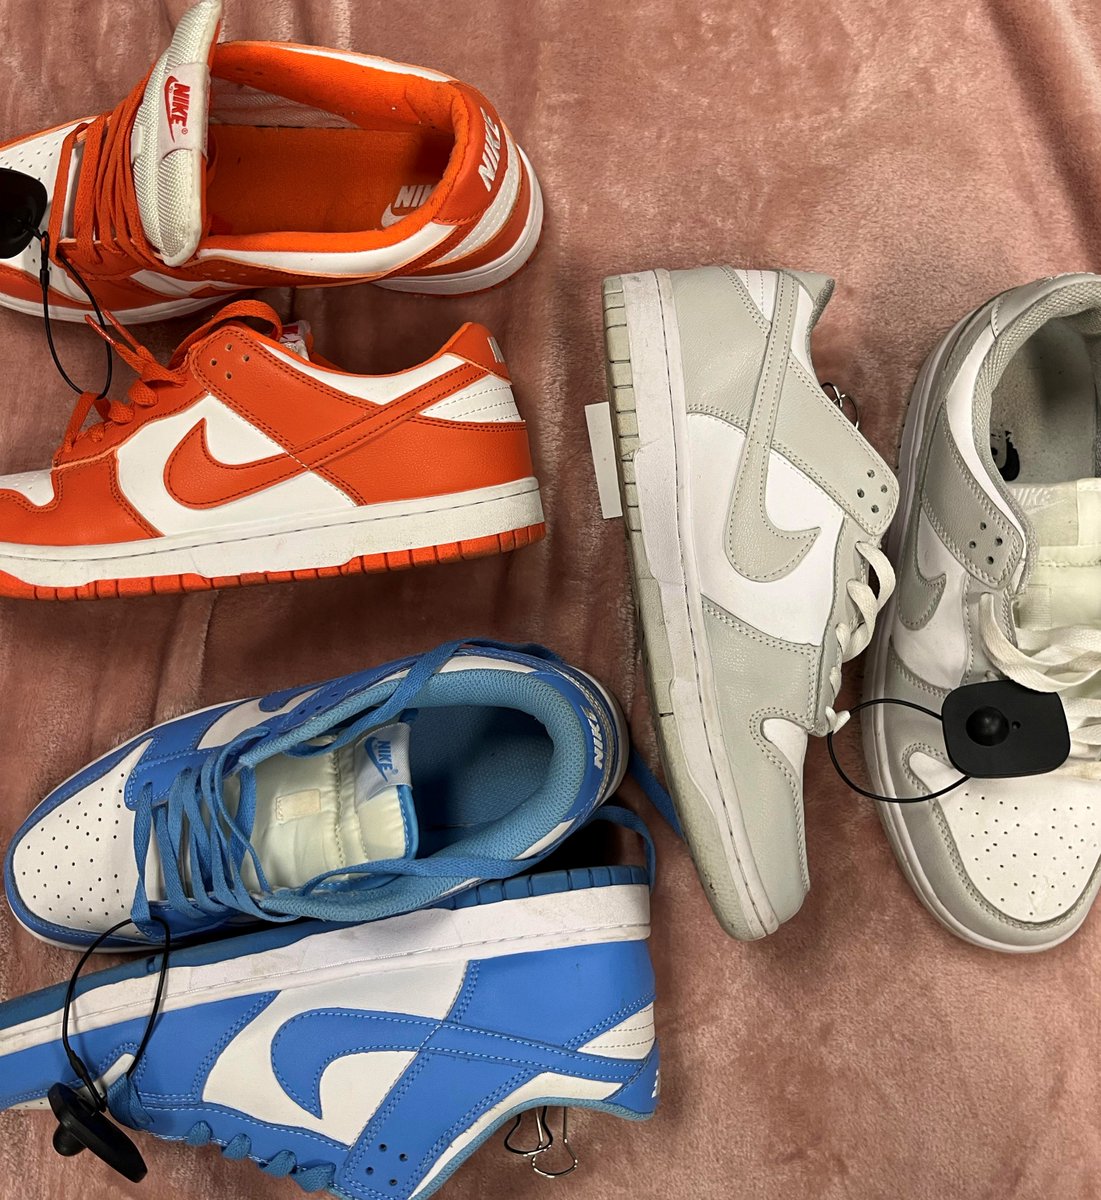 Gently Used Nike Dunks shoes just in! Come shop our sneaker selection!
.
.
.
.
#platoscloset #portrichey #trendyshoes #trendystyles #shoes # #Footwear #Sneaker #gentlyusednike